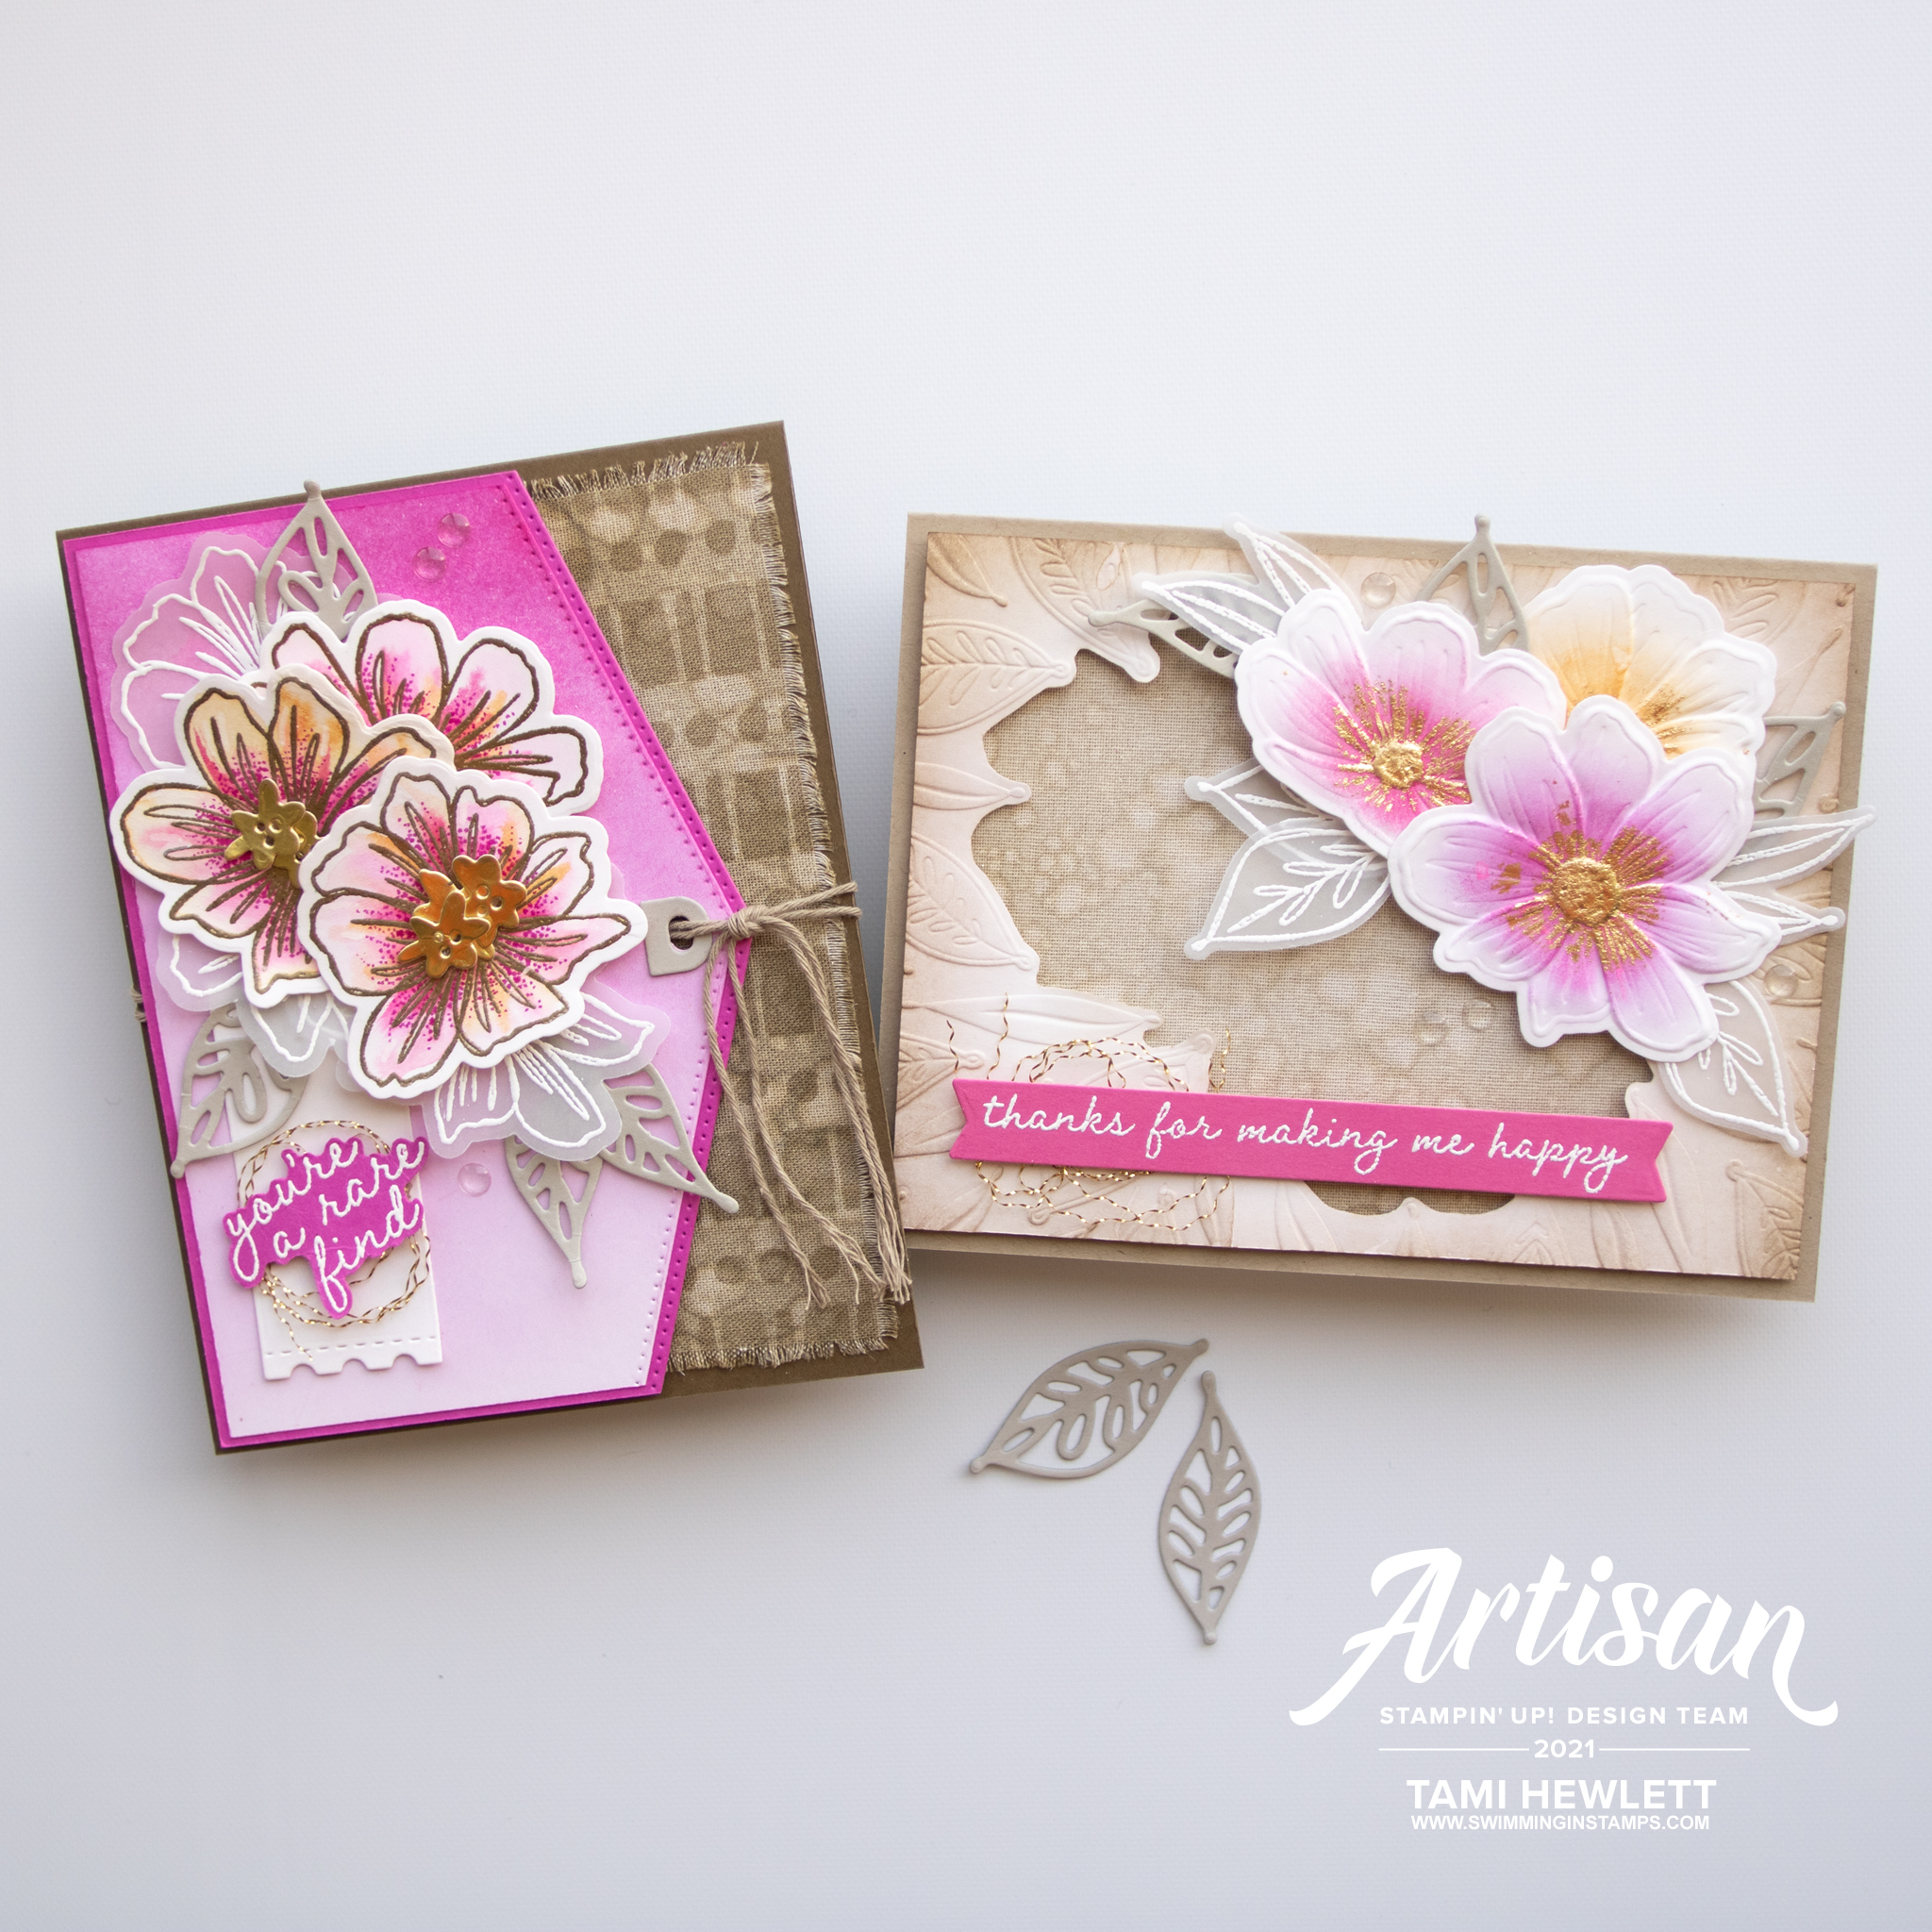 Three New 3D Embossing Folders From Stampin' Up! - Lola Rist, Stampin' Up!  Demonstrator